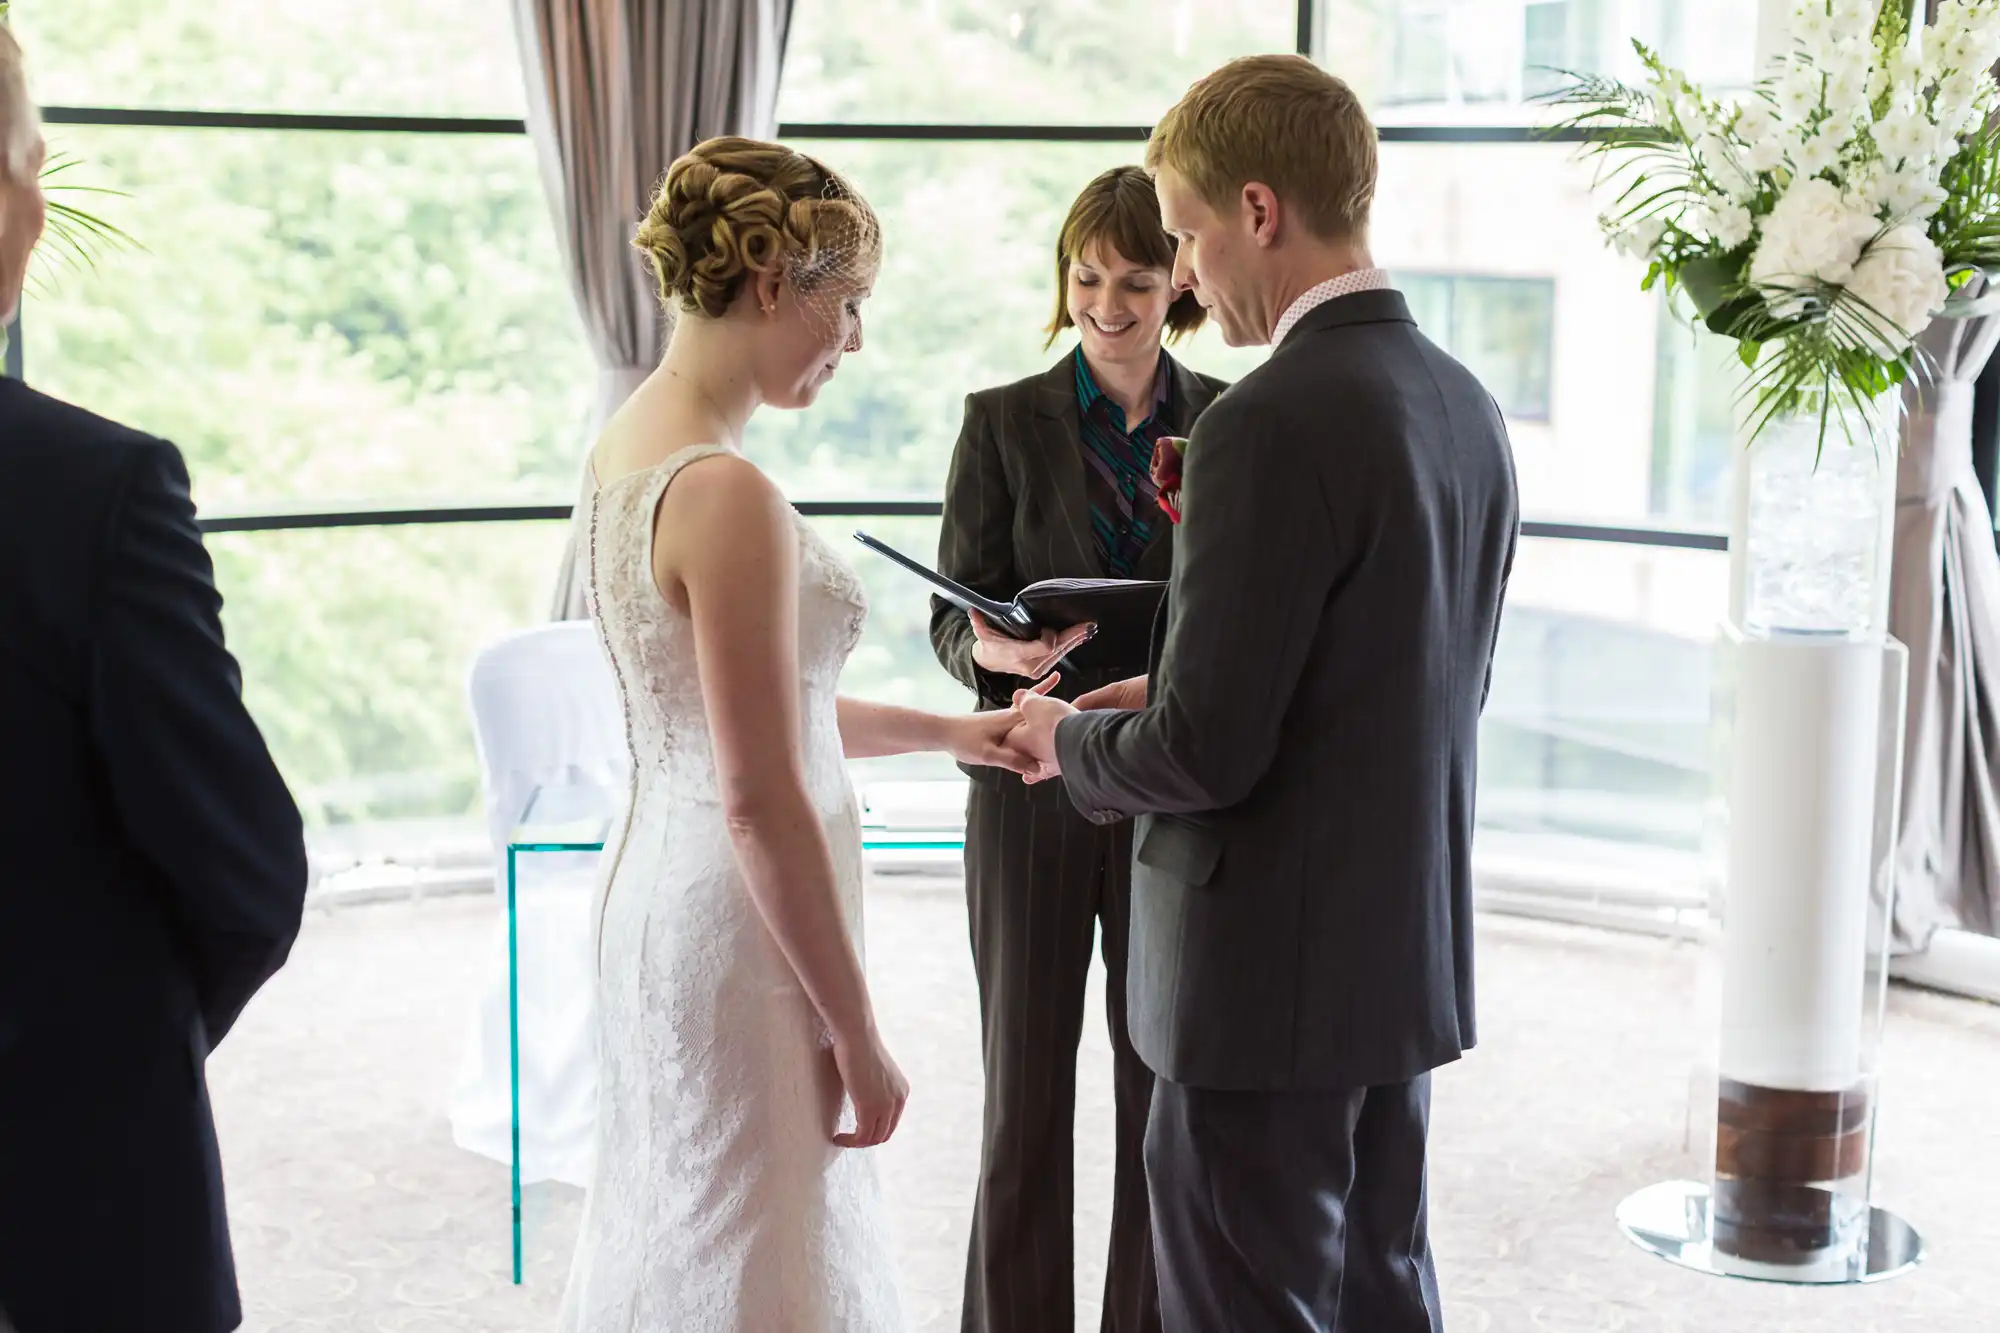 A couple exchanges rings during a wedding ceremony, officiated by a woman, in a room with large windows and a floral arrangement.